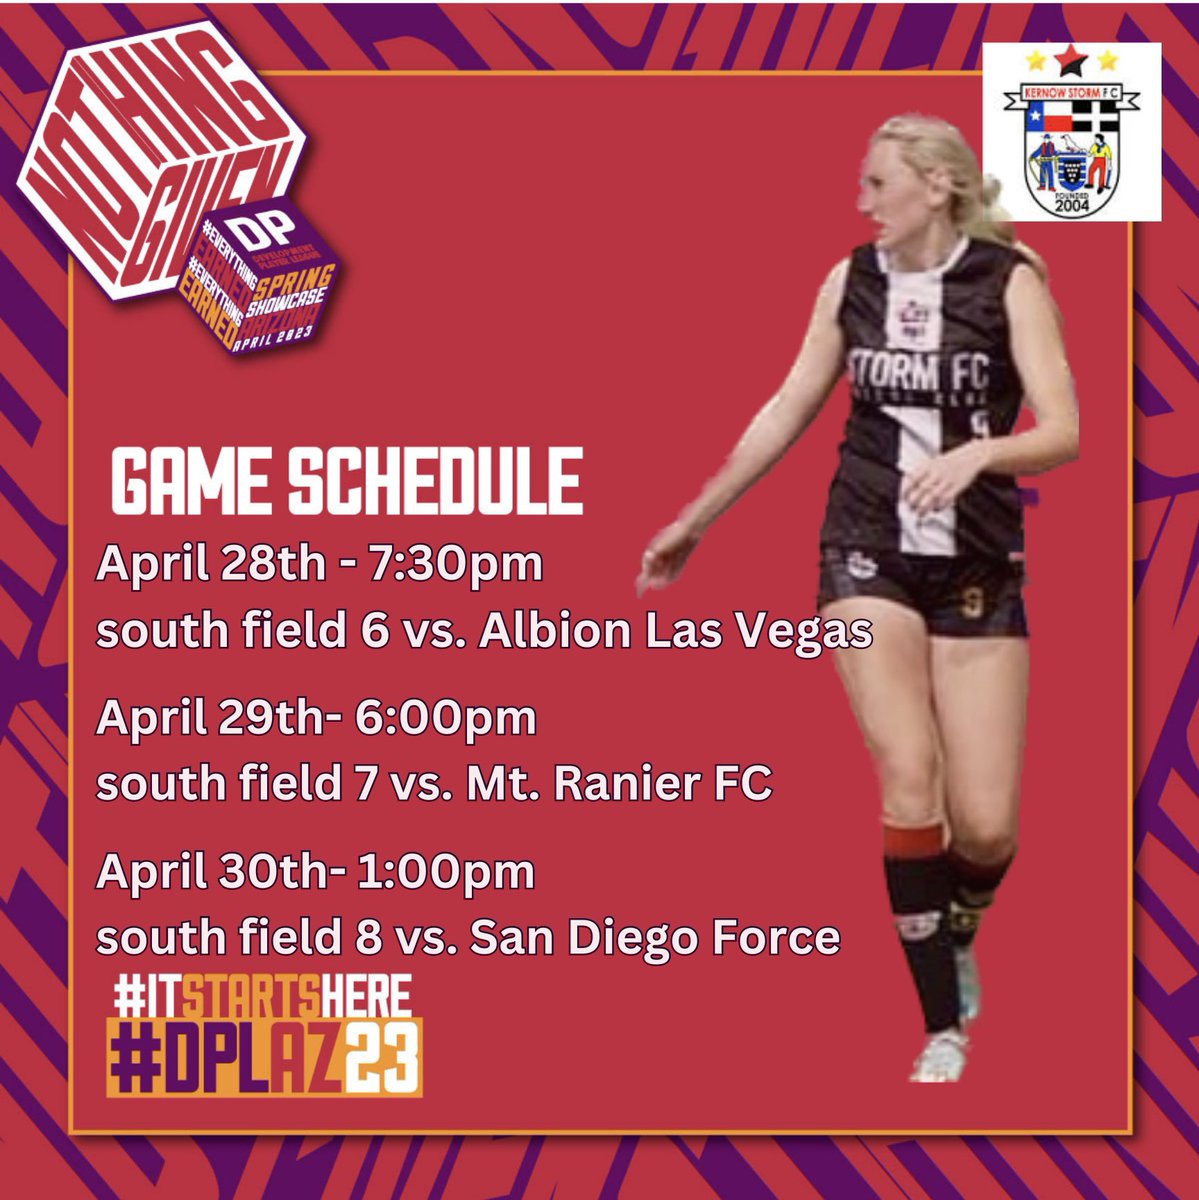 3 more days, and I will be heading to Arizona for the @DP_League spring showcase. So excited to compete with teams from around the country! #nothinggiven #DPLAZ23 #itallstartshere @SSN_NCAASoccer @storm_futbol @PrepSoccer @ImCollegeSoccer